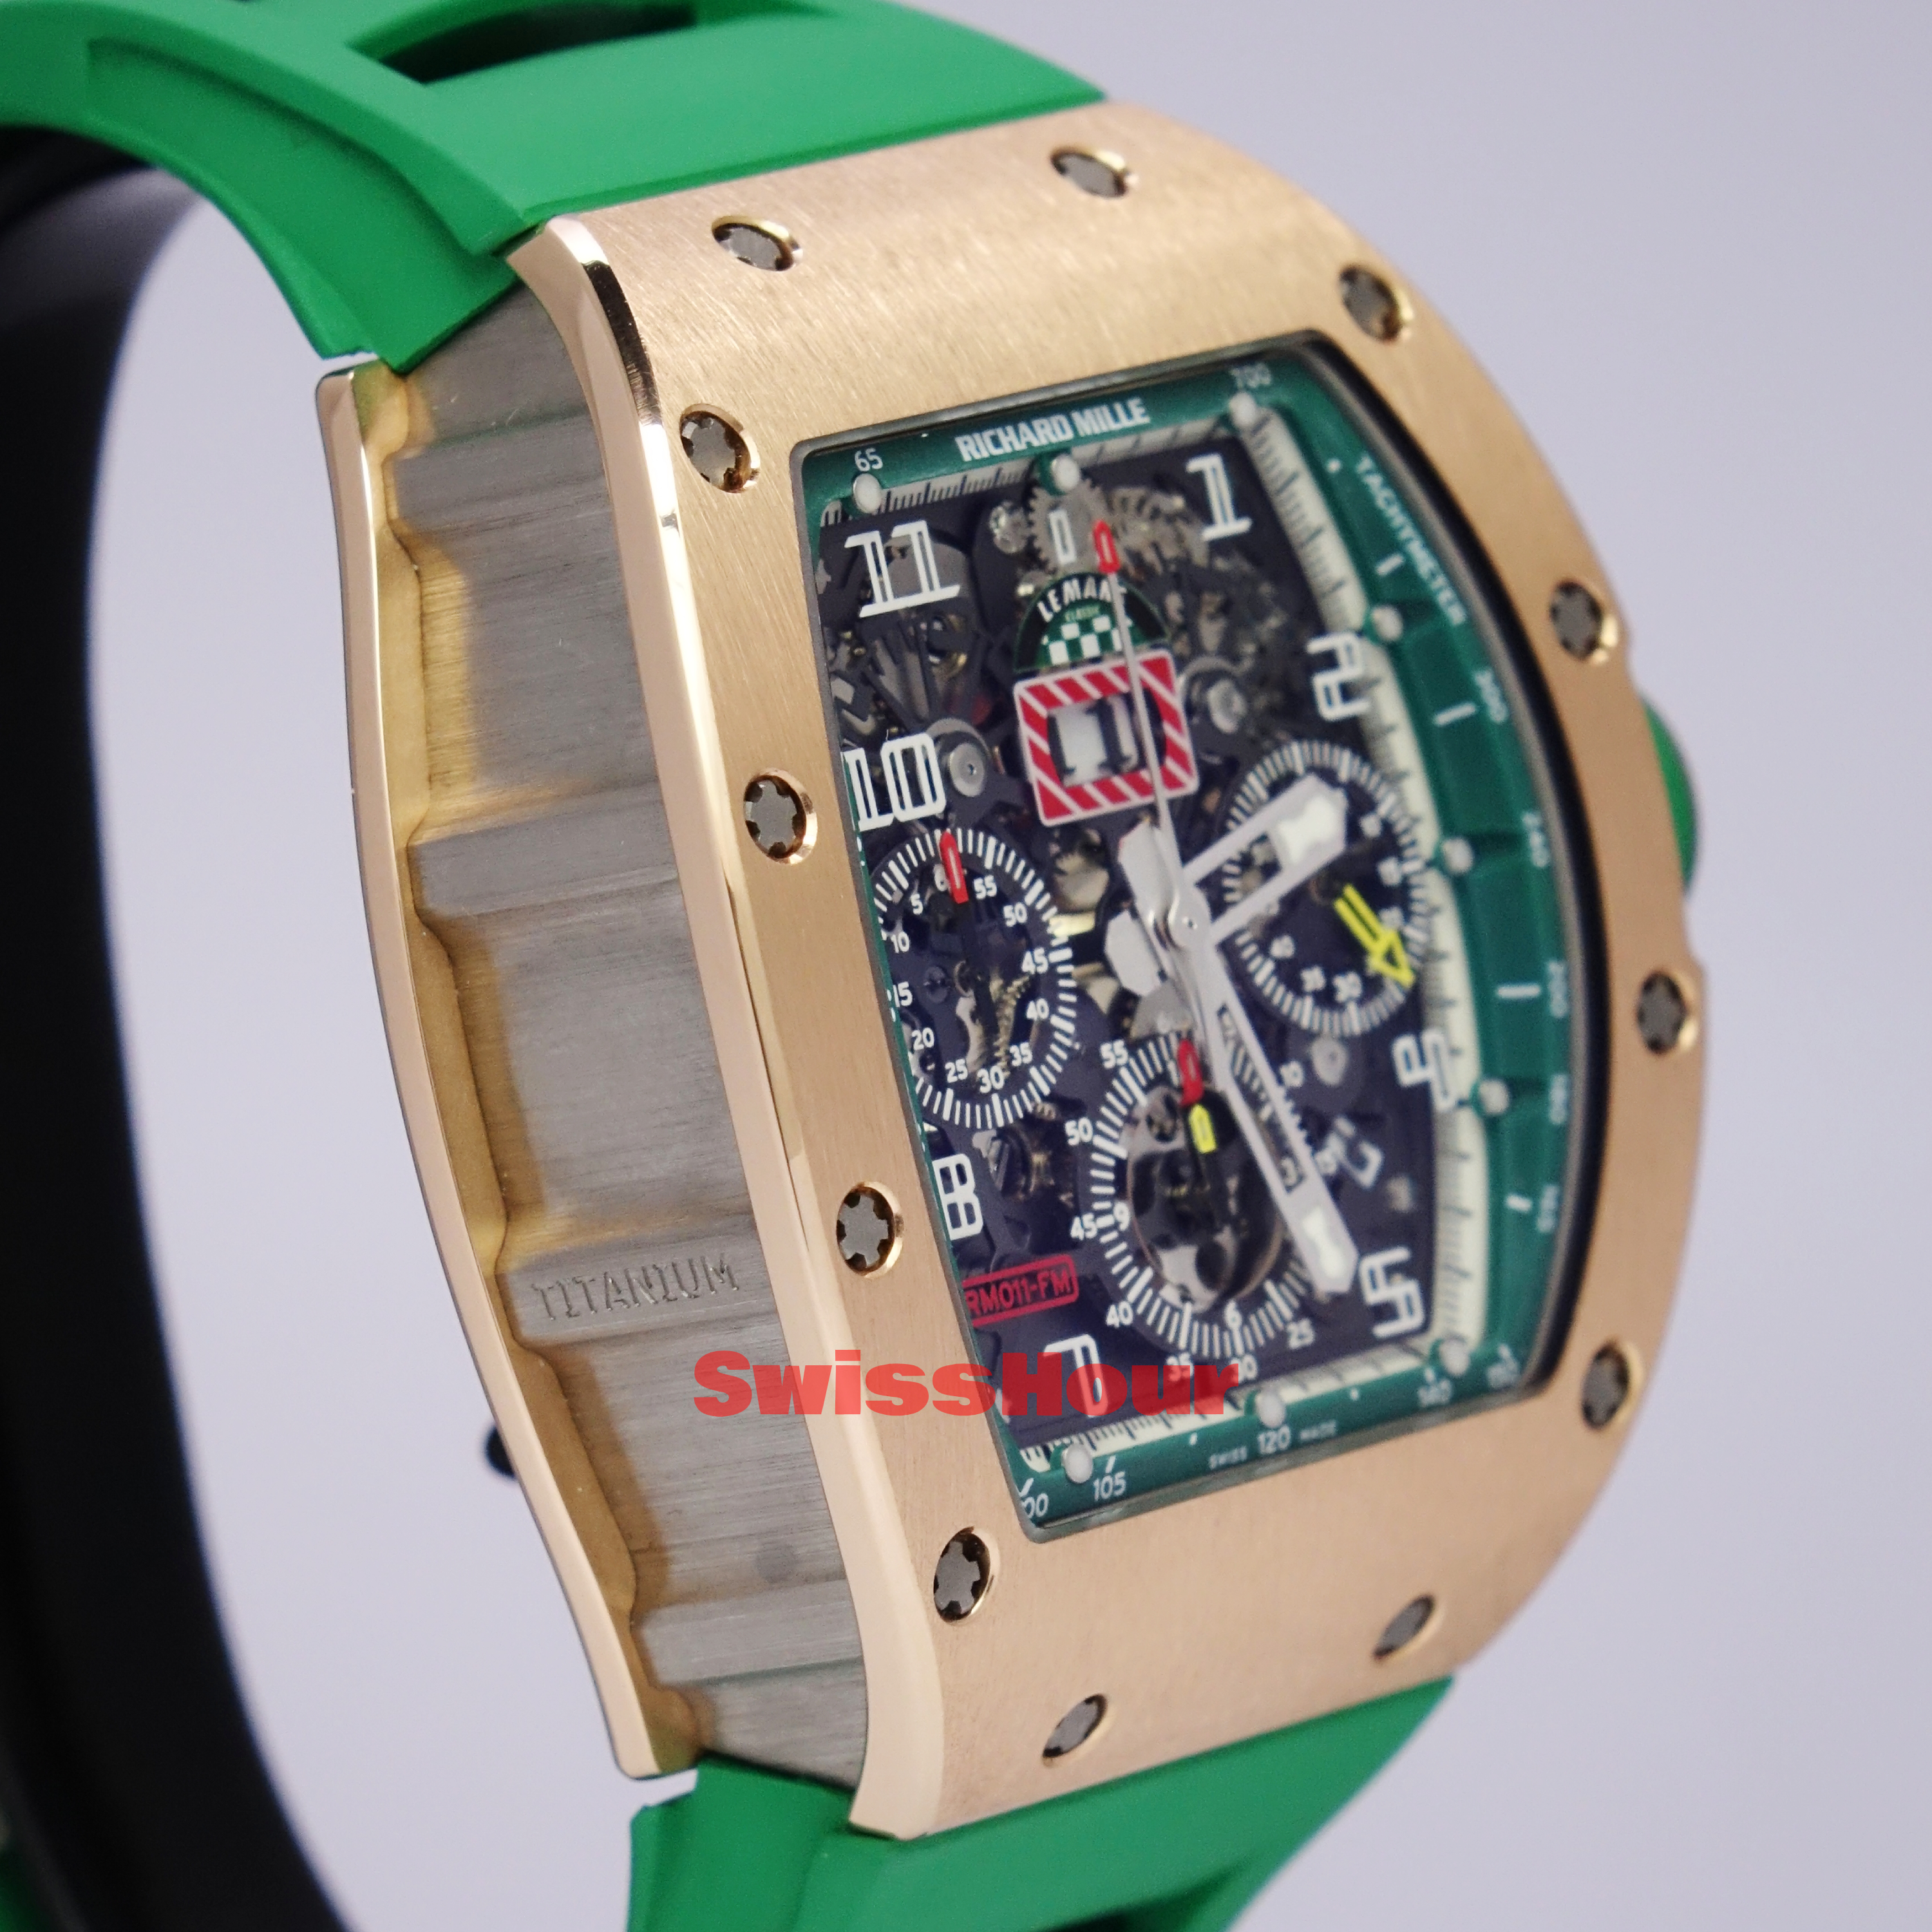 Richard Mille RM011 Le Mans classic RG/Ti flyback limited 150pcs year